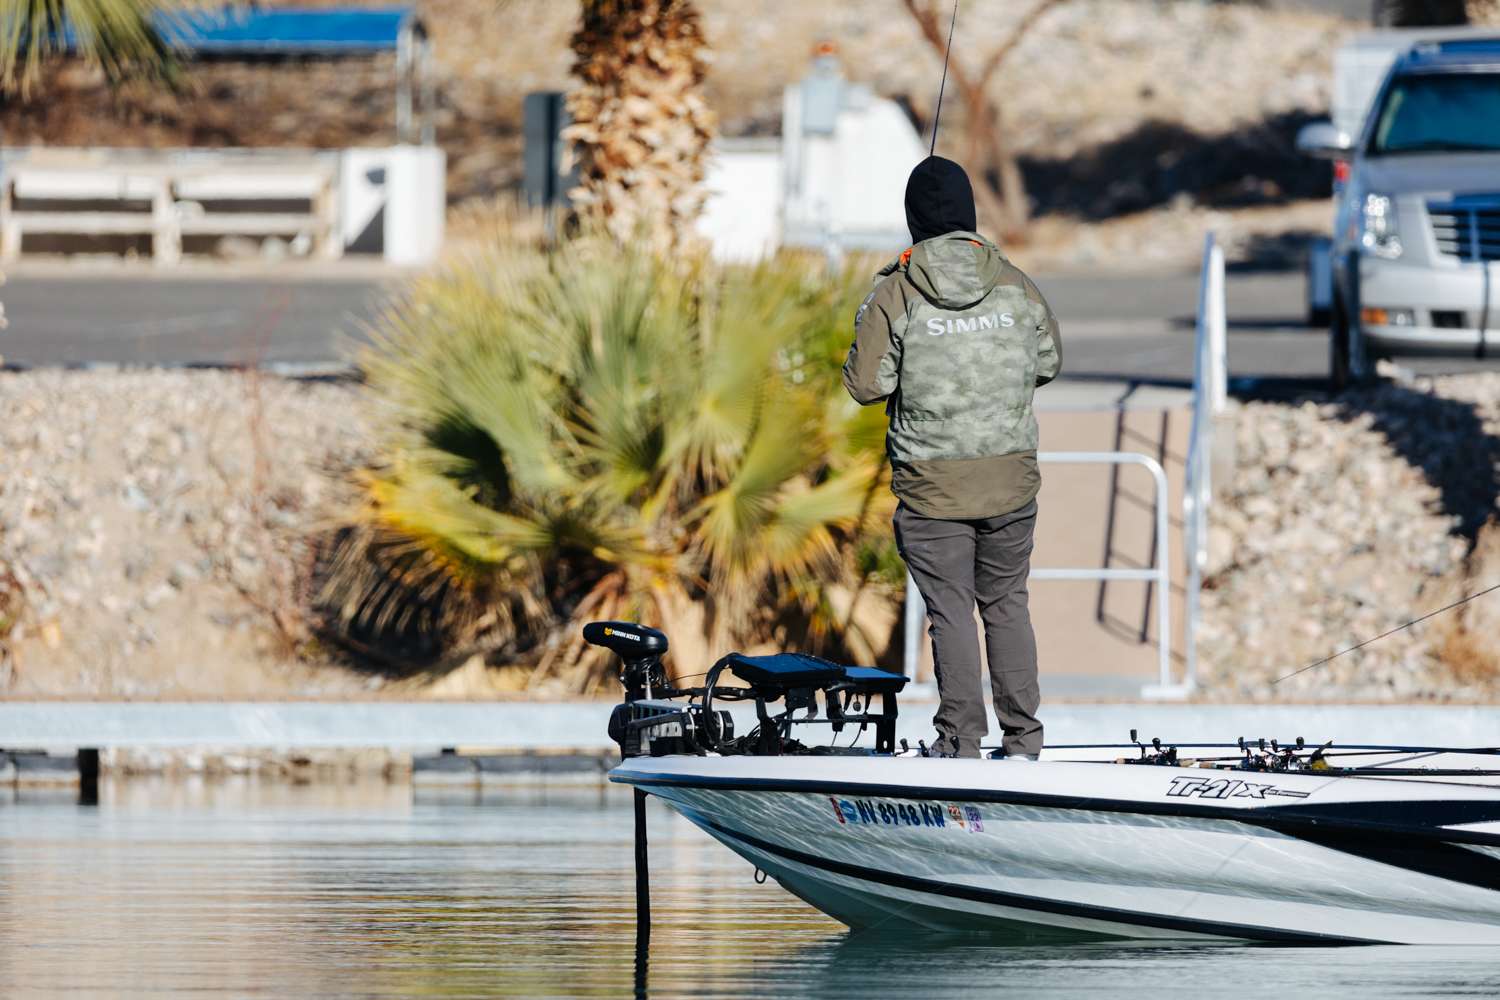 Catch the on the water action from the final day of the TNT Fireworks B.A.S.S. Nation Western Regional at Lake Havasu. 